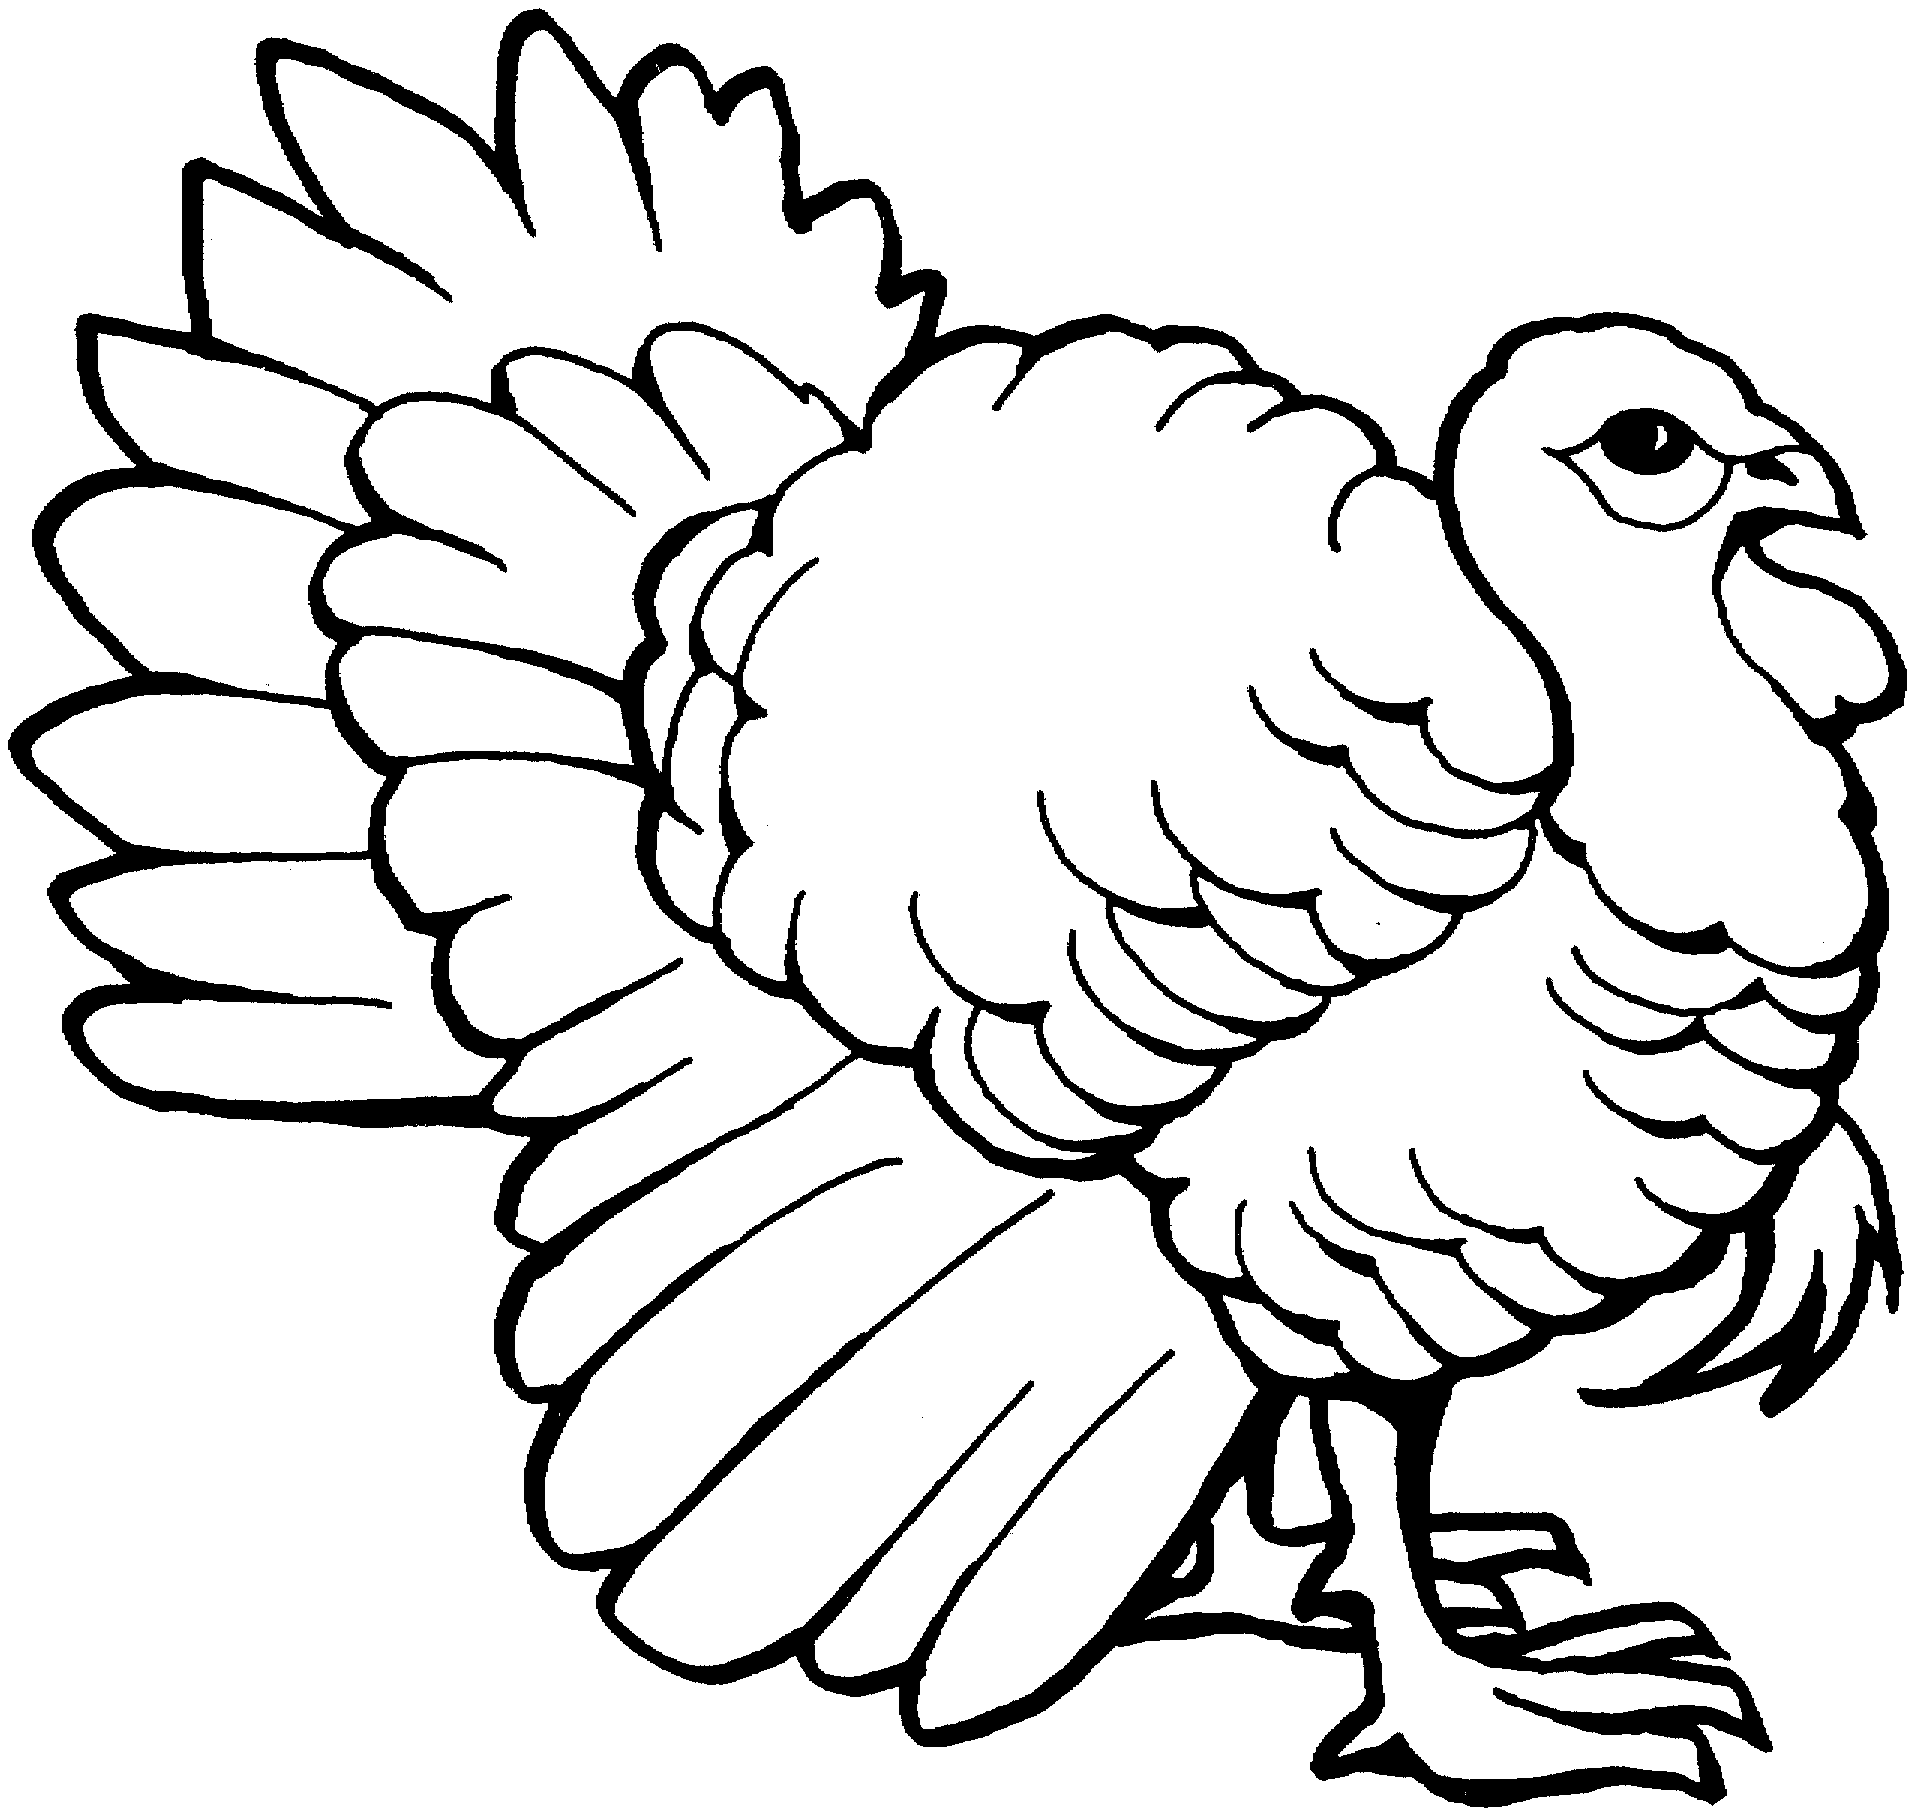 Pix For > Turkey Line Drawing